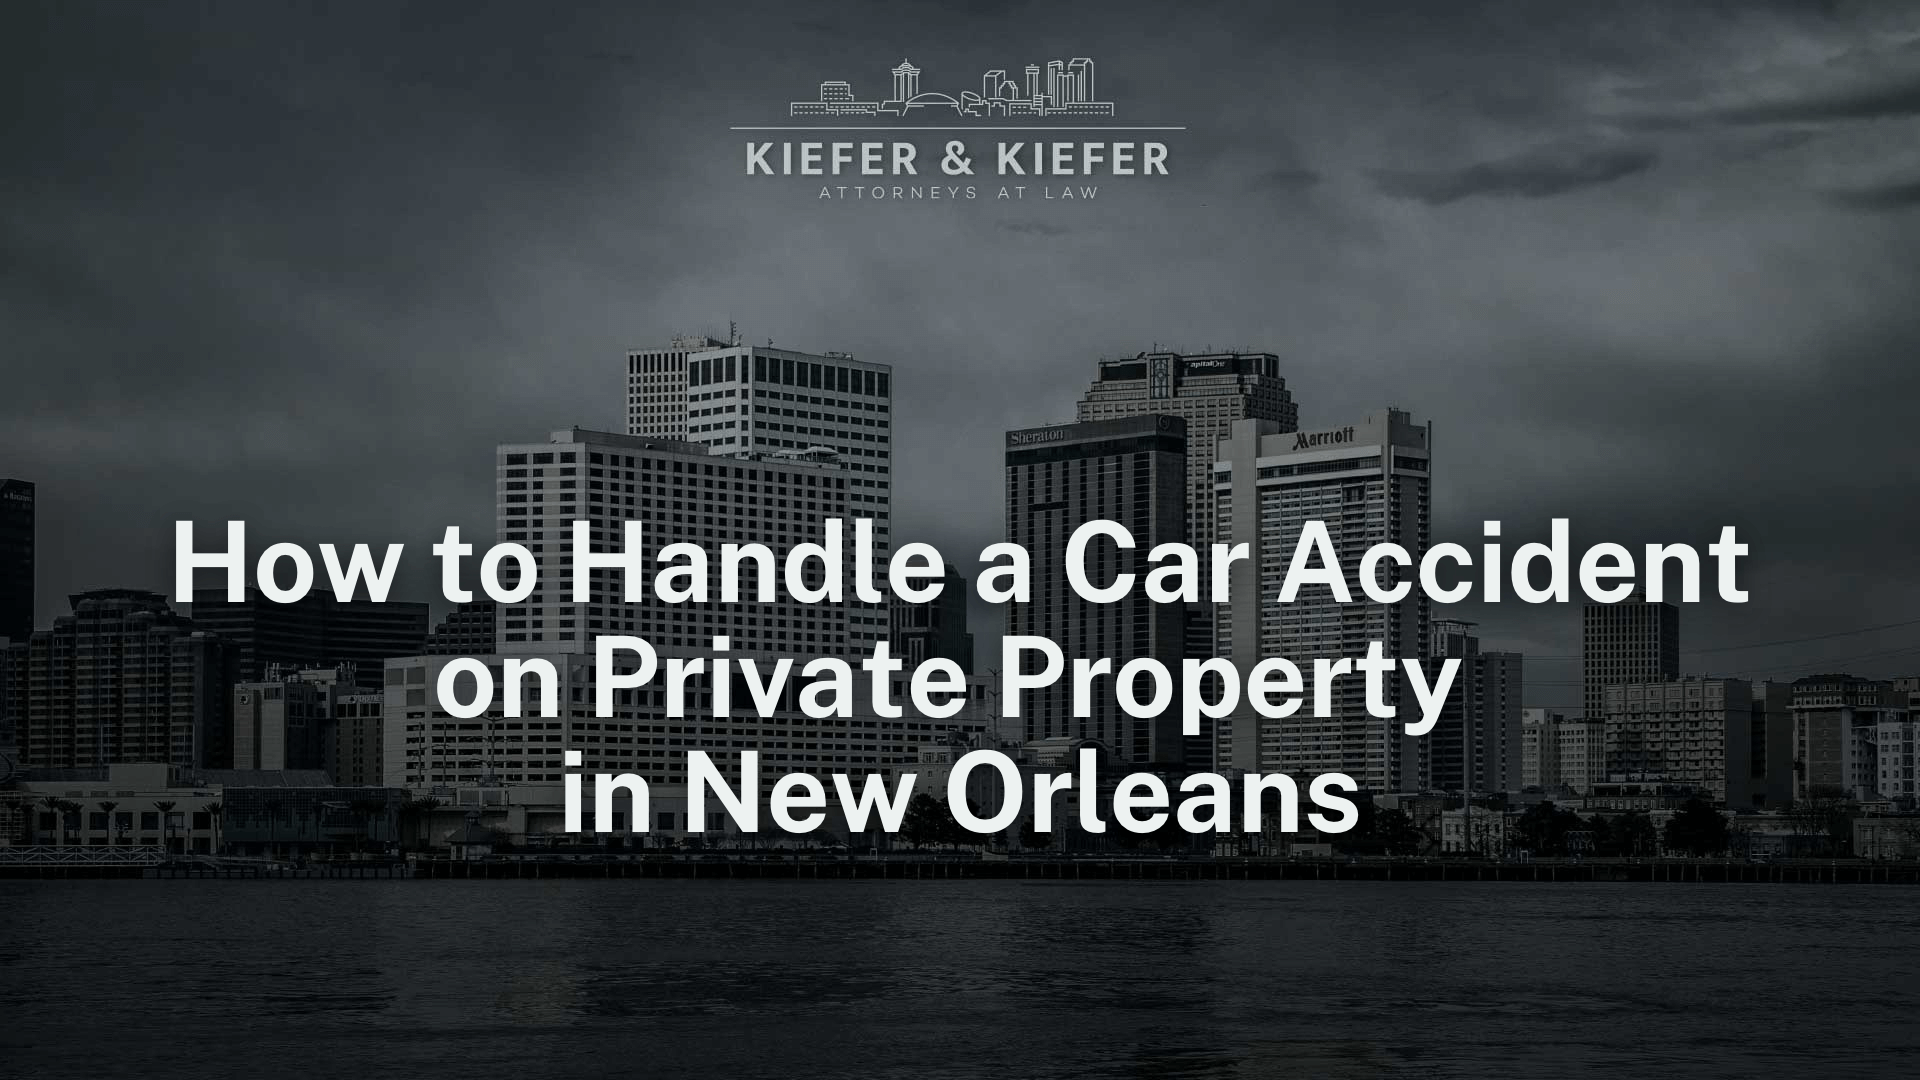 How to Handle a Car Accident on Private Property in New Orleans - Kiefer & Kiefer New Orleans Personal Injury Attorneys